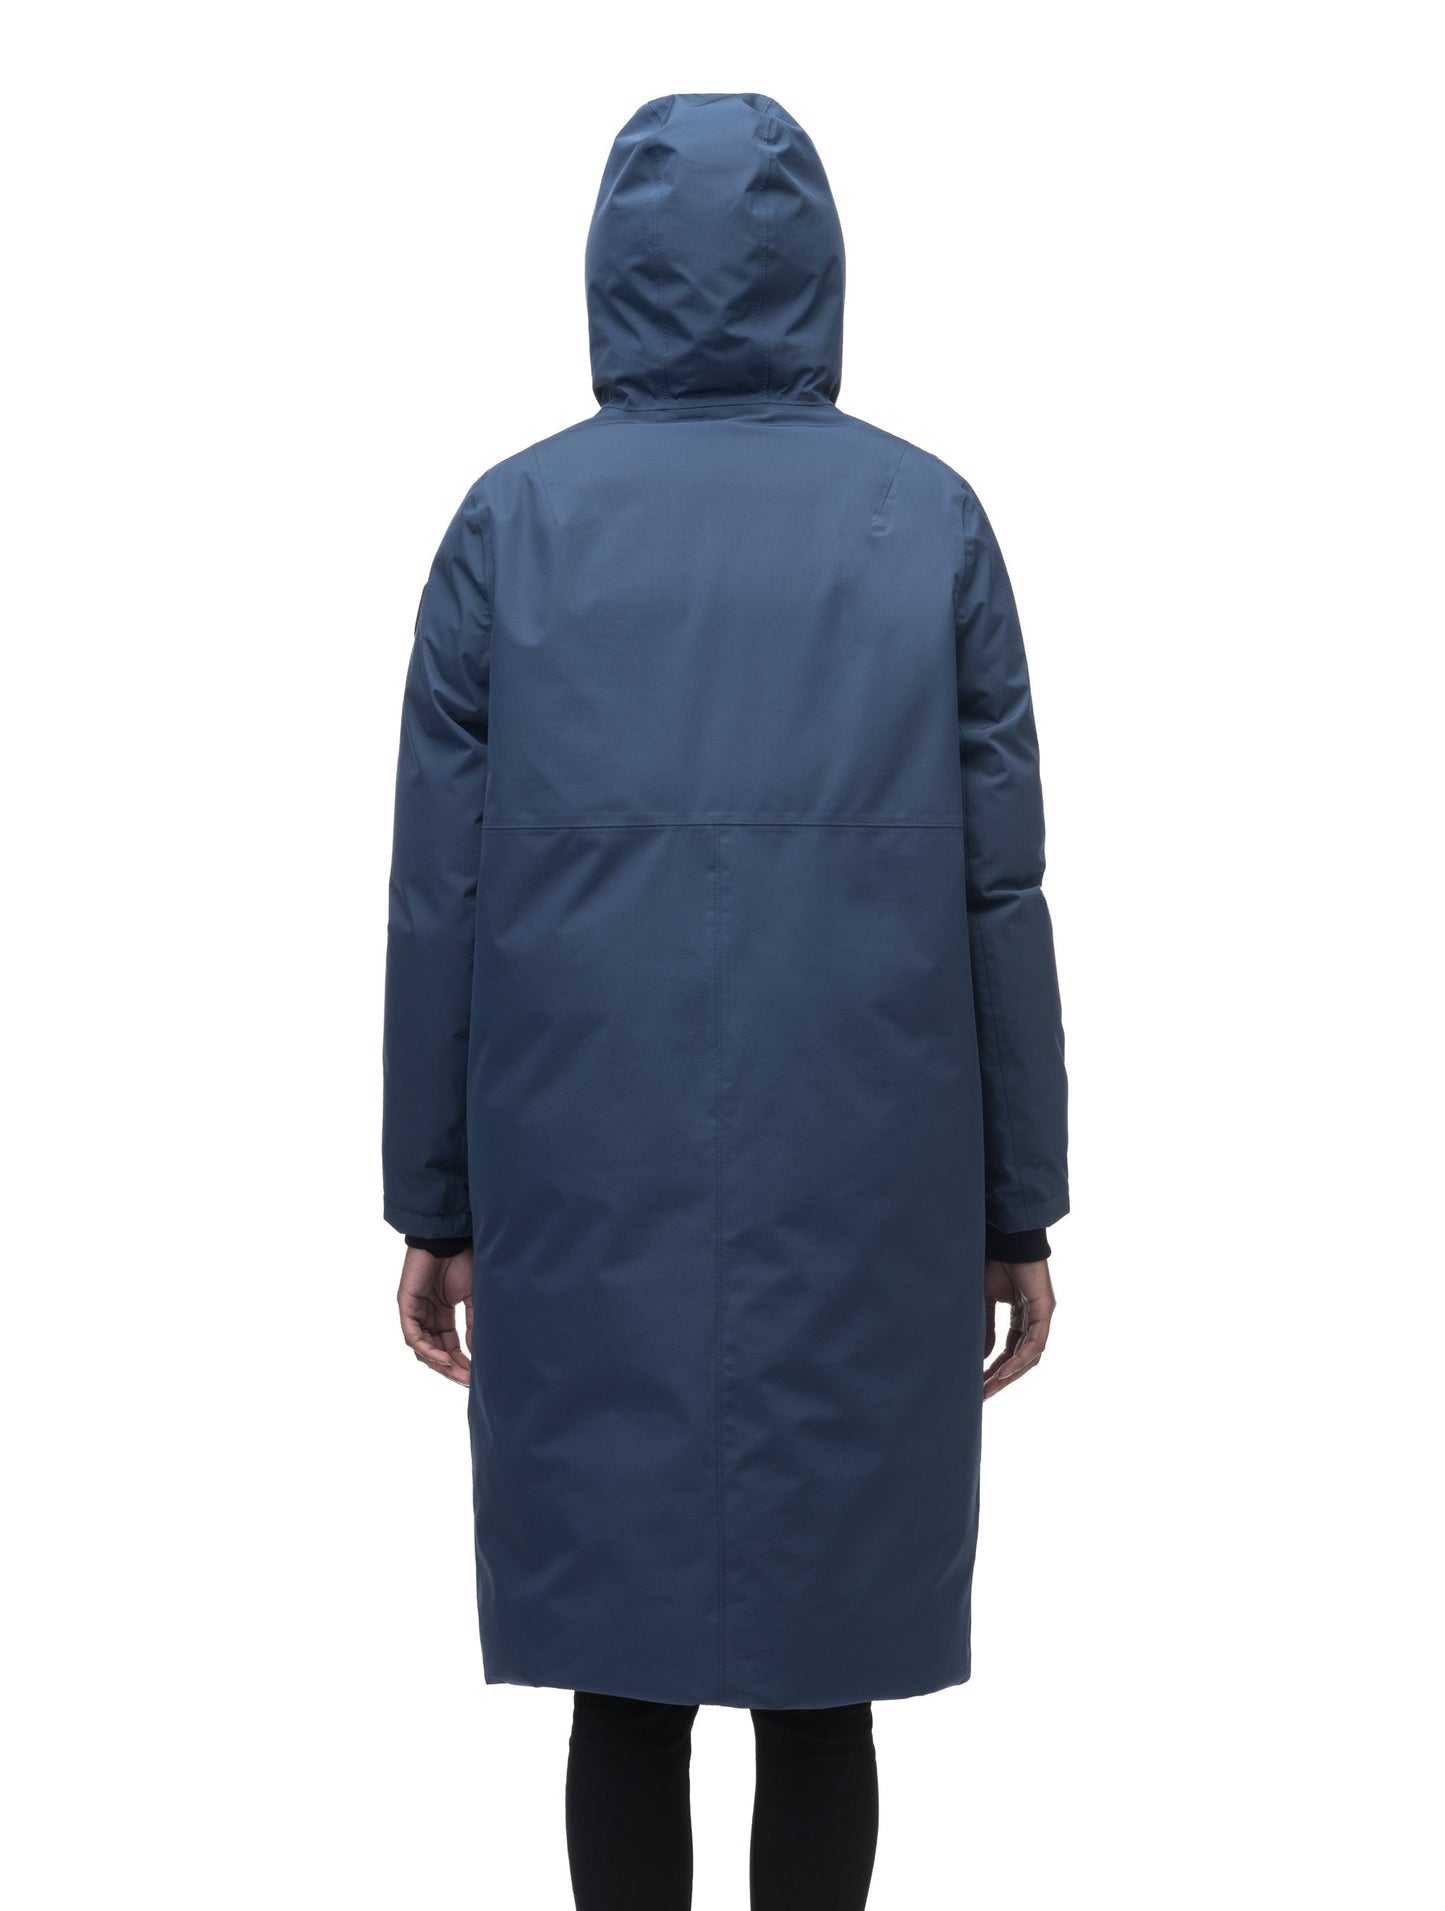 Ladies knee length reversible down-filled parka with non-removable hood in Marine